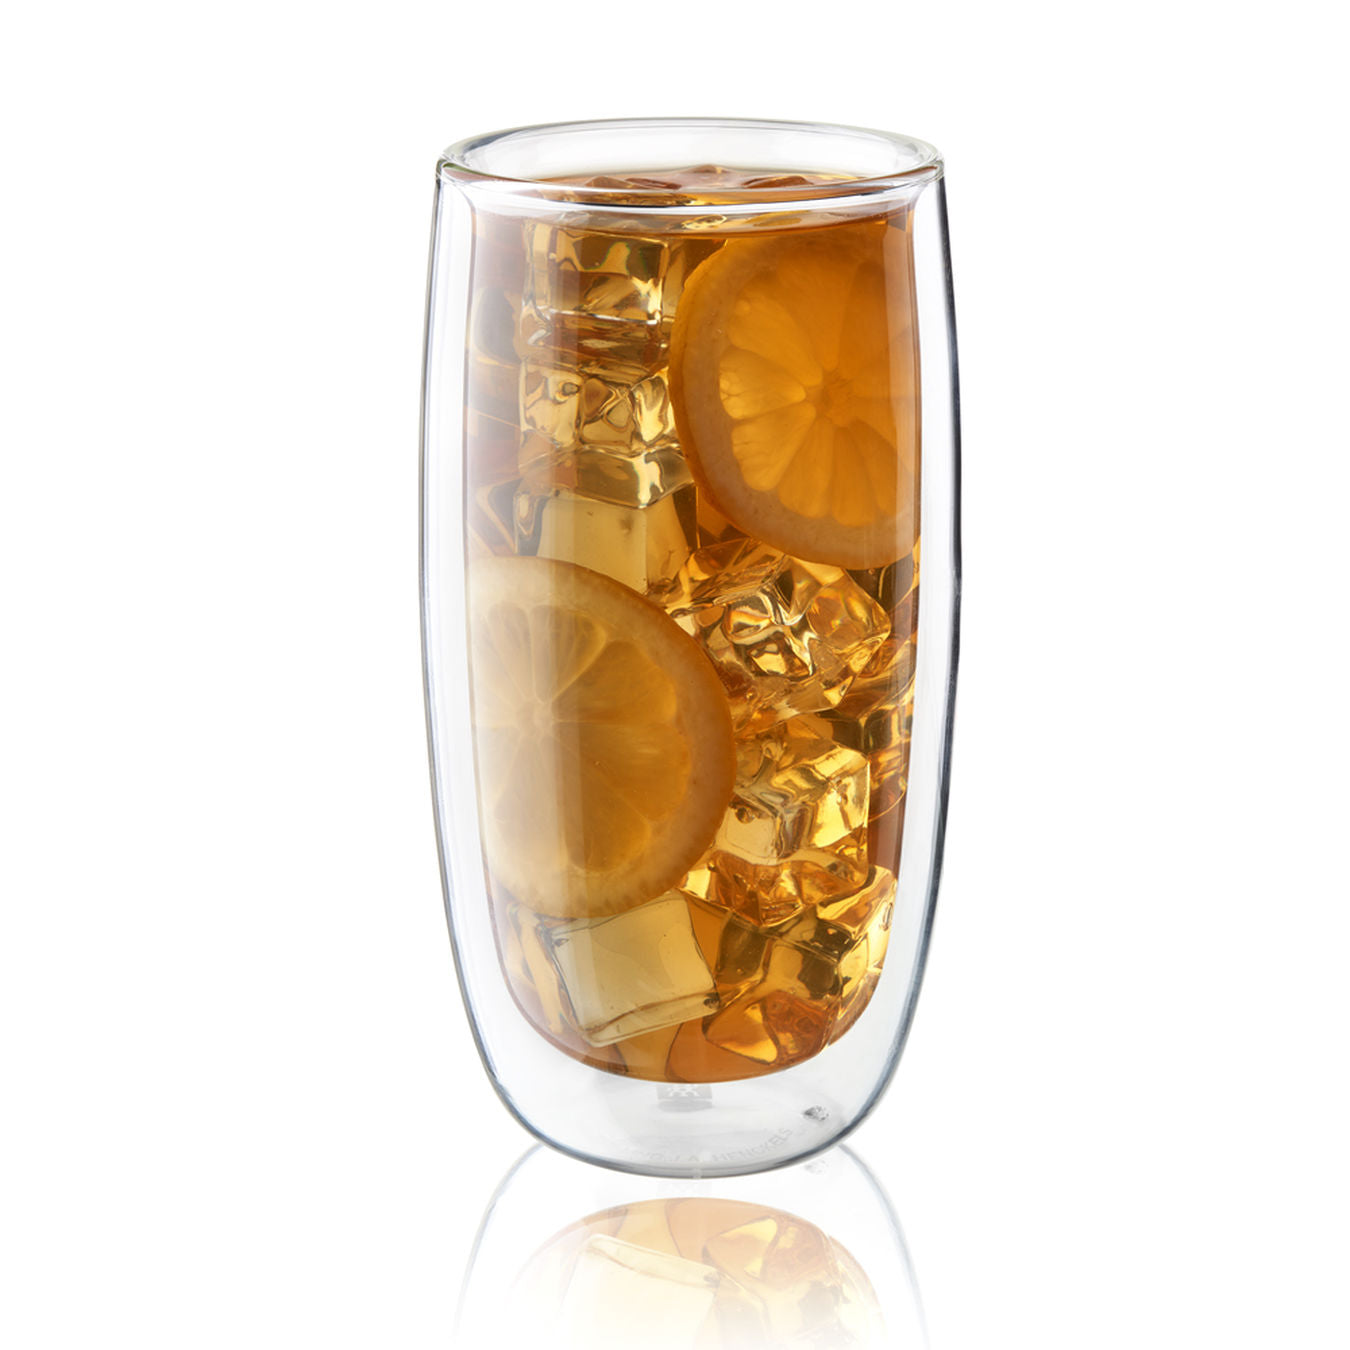 A photograph of the Zwilling Sorrento Doubled walled 16oz Beverage Glass filled with ice tea and lemon slices and ice